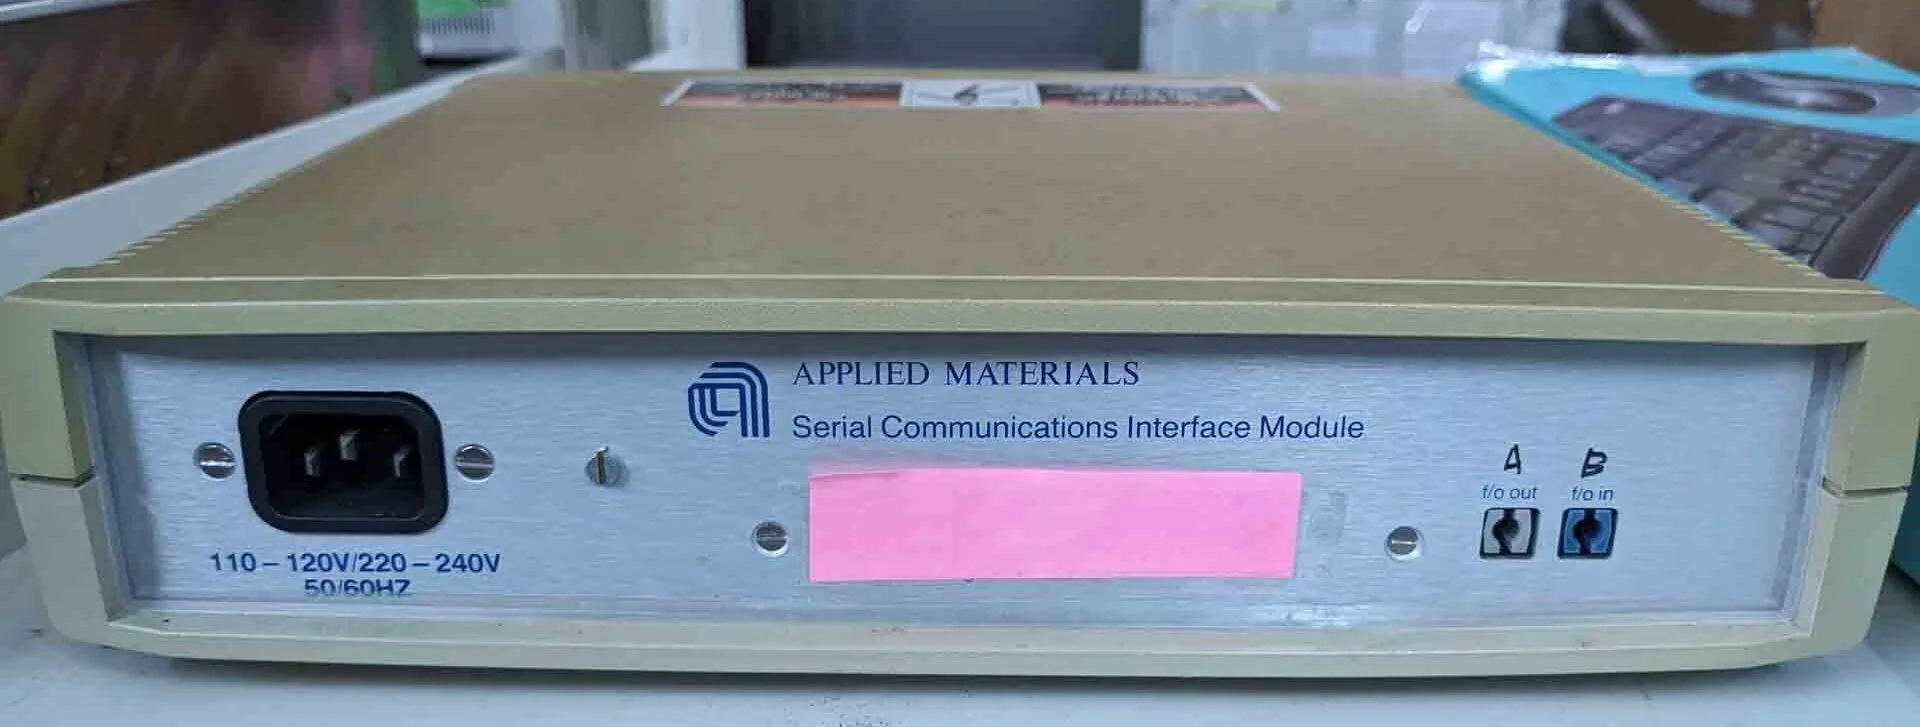 AMAT / APPLIED MATERIALS Lot of spare parts 원자로 판매 가격